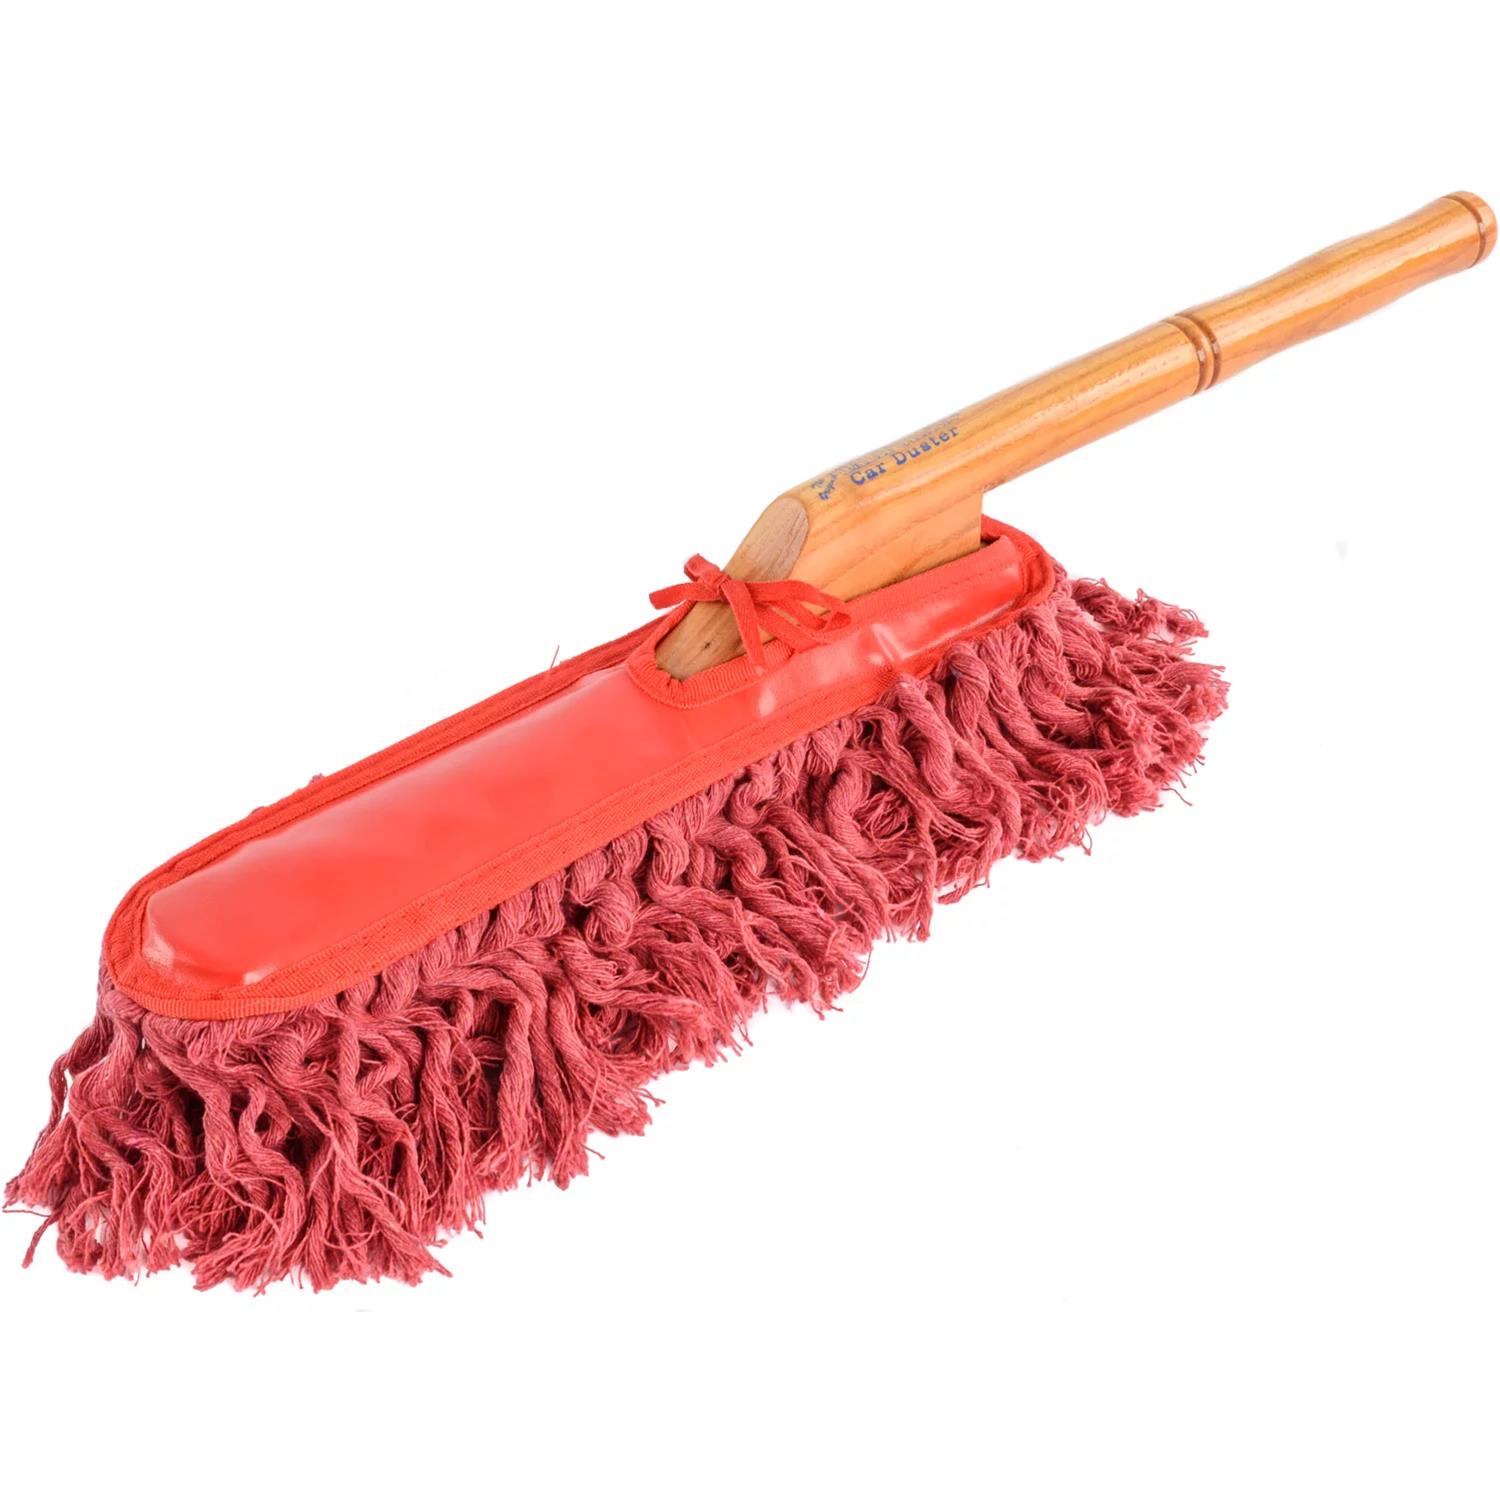 Car Duster 62442 Standard Car Duster Wooden Handle with 